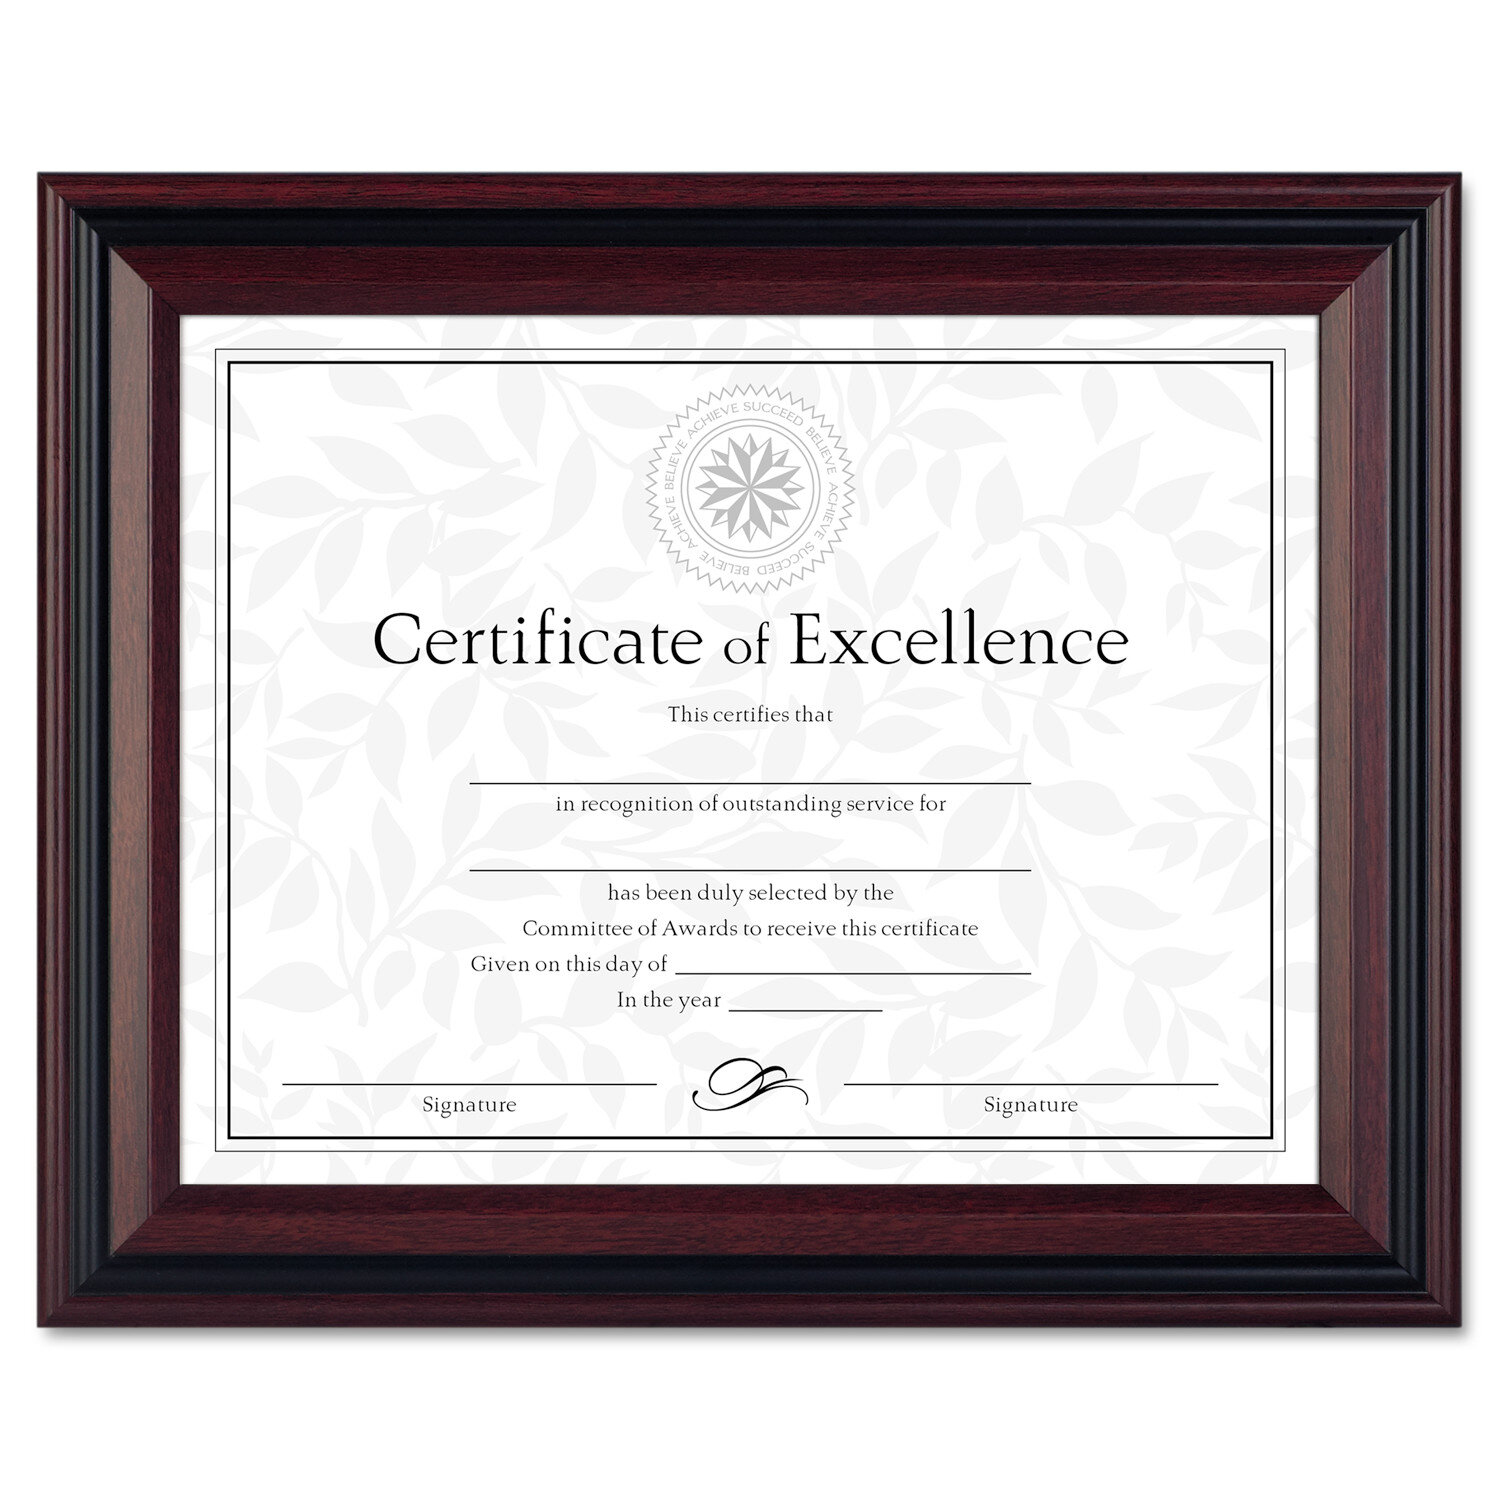 Vertical or Horizontal Display for Wall or Tabletop. ARTrend Premium 8.5x11 Certificate Diploma Frames Document Frames with Glass Fronts Set of 2 Pack Brown